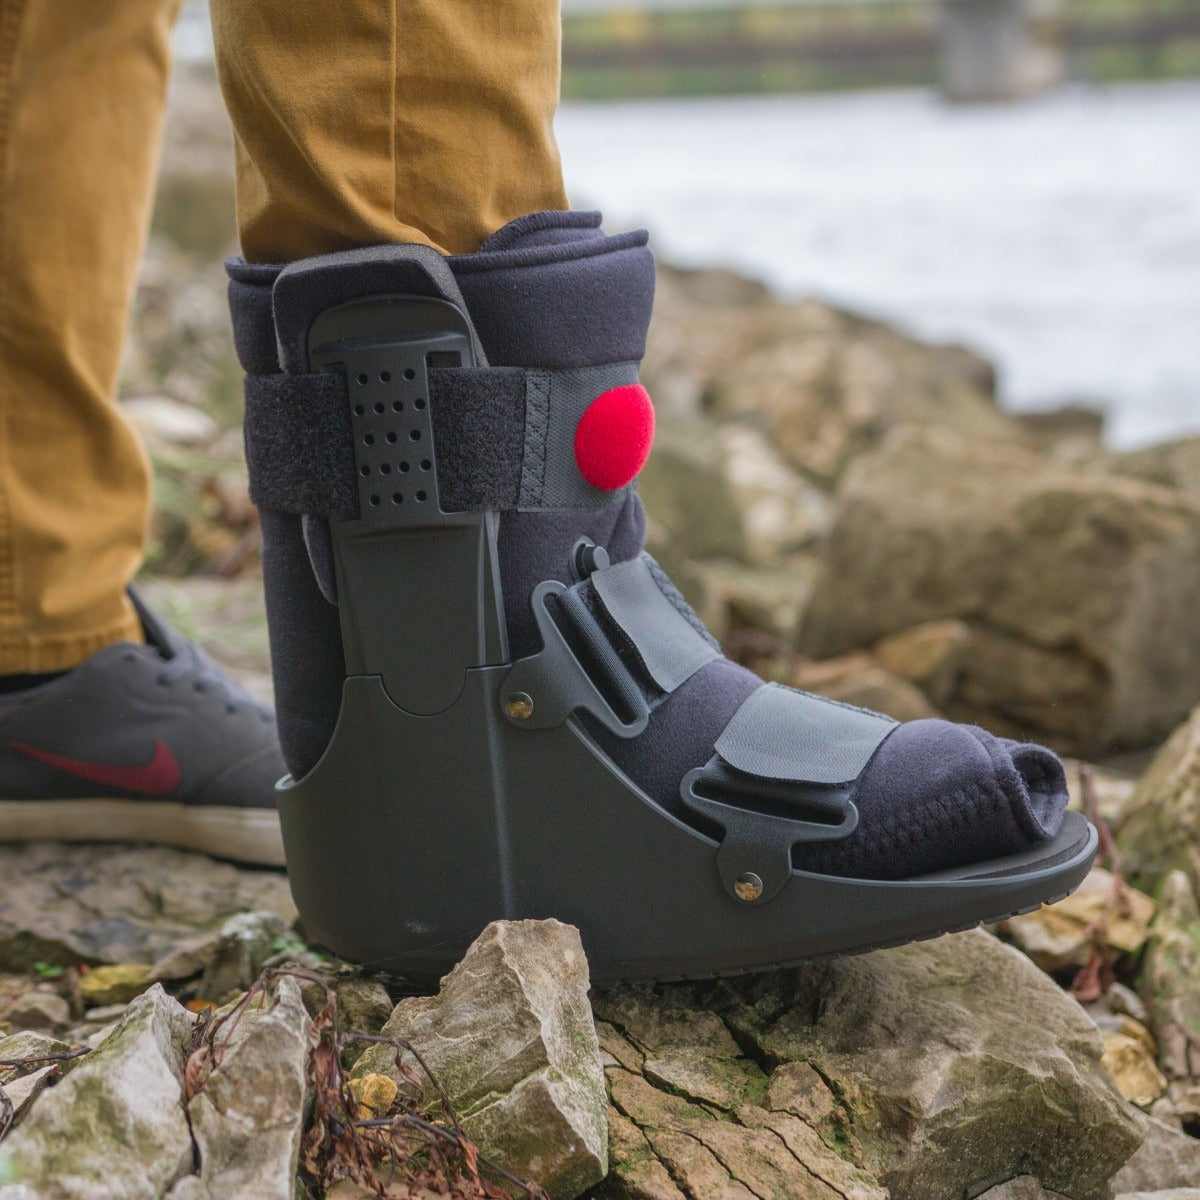 Short air walking boot has a low-profile polymer shell and innovative air cell technology